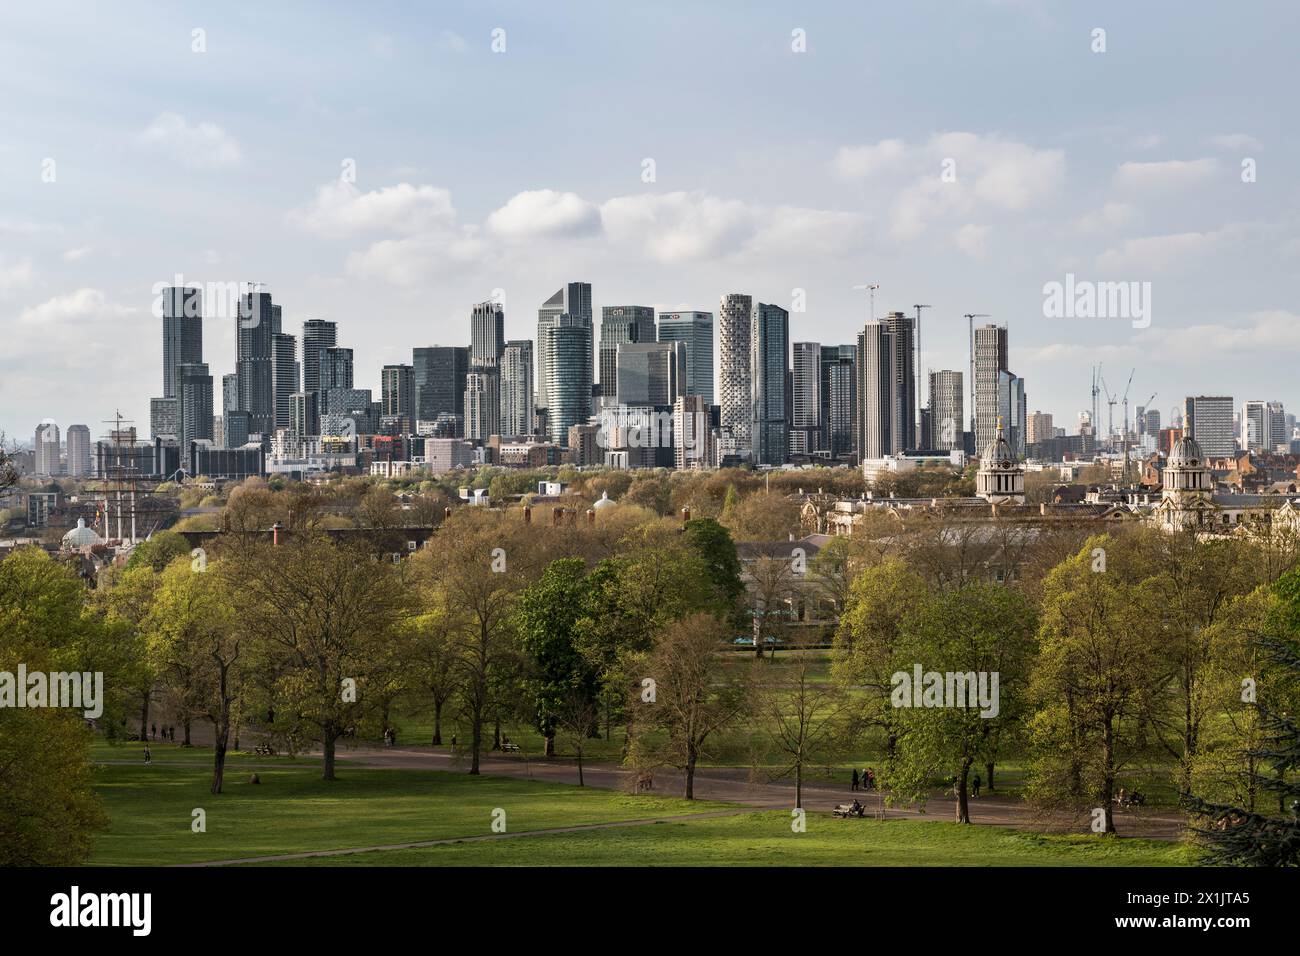 The financial and business district of Canary Wharf  in London Docklands, London, UK, seen from Greenwich Park across the River Thames Stock Photo